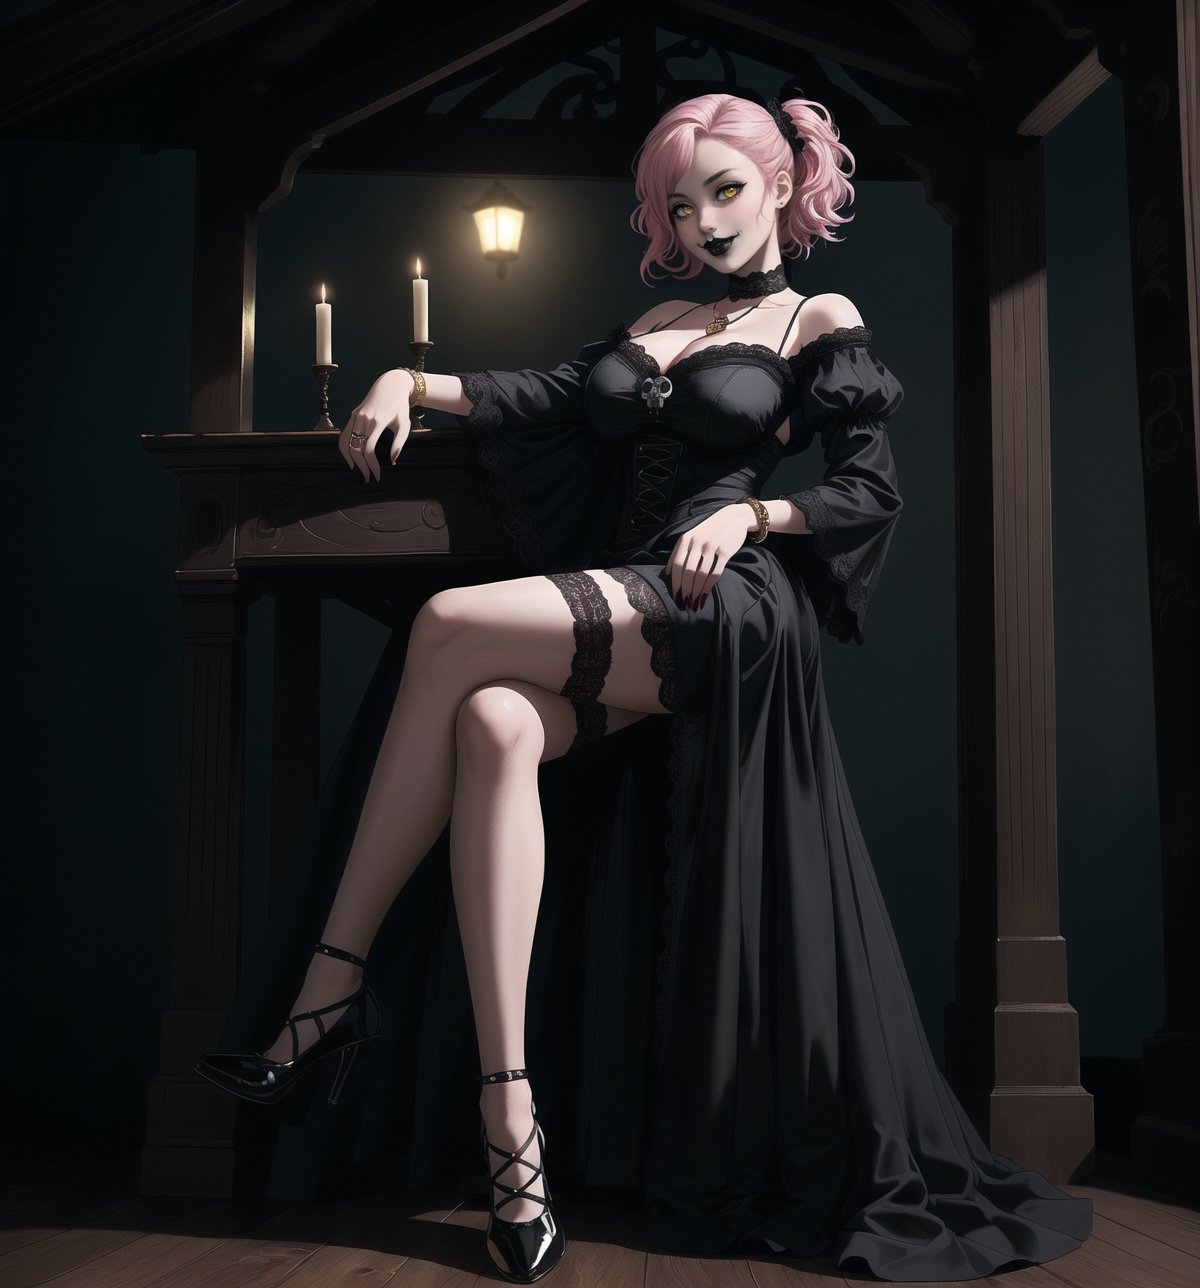 A gothic-lolita style masterpiece with realistic details, rendered in ultra-high resolution. | A young 22-year-old woman with pink hair and yellow eyes wears an elegant and provocative maid outfit. The black dress with white lace and the white apron with lace details highlight her sensual curves. She also wears black stockings and black low-heeled shoes, as well as accessories such as a pink heart pendant and a black leather bracelet. ((The young woman smiles at the viewer, showing her white teeth and wearing black lipstick)), creating a charming contrast to her sweet and innocent appearance. | The scene takes place in a macabre house, poorly lit by candles scattered throughout the room. The wooden structures, cobwebs hanging from the walls, and skulls and bones scattered across the floor create a spooky and mysterious atmosphere. The young woman stands out amidst this dark backdrop, adding a layer of beauty and fascination to the image. | Soft, moody lighting effects create a gothic mood, while detailed textures on clothing, accessories and set elements add realism to the masterpiece. | An intriguing and compelling scene of a young gothic-lolita woman in a macabre house, exploring themes of contrast, beauty and mystery. | (((((The image reveals a full-body shot as she assumes a sensual pose, engagingly leaning against a structure within the scene in an exciting manner. She takes on a sensual pose as she interacts, boldly leaning on a structure, leaning back in an exciting way.))))). | ((full-body shot)), ((perfect pose)), ((perfect fingers, better hands, perfect hands)), ((perfect legs, perfect feet)), ((huge breasts)), ((perfect design)), ((perfect composition)), ((very detailed scene, very detailed background, perfect layout, correct imperfections)), More Detail, Enhance